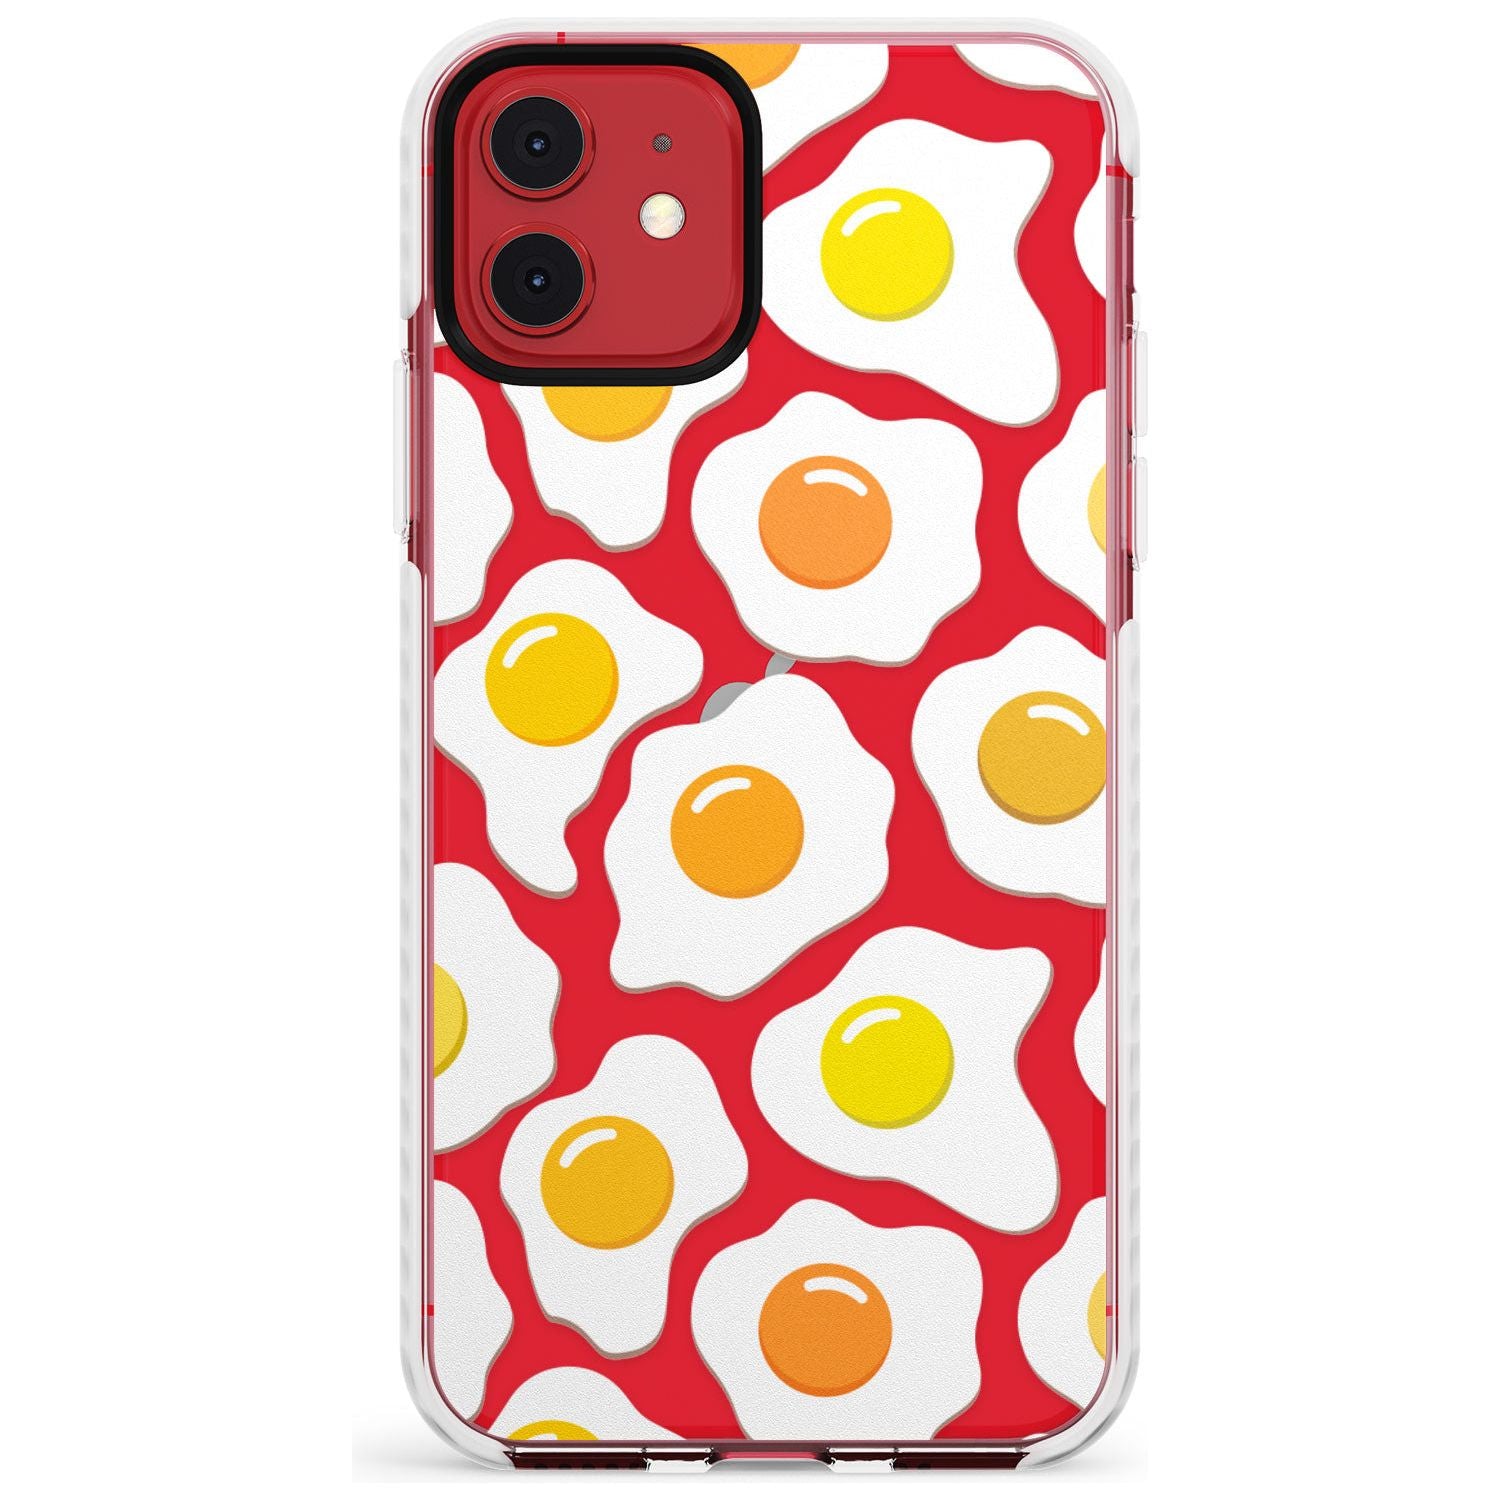 Fried Egg Pattern Impact Phone Case for iPhone 11